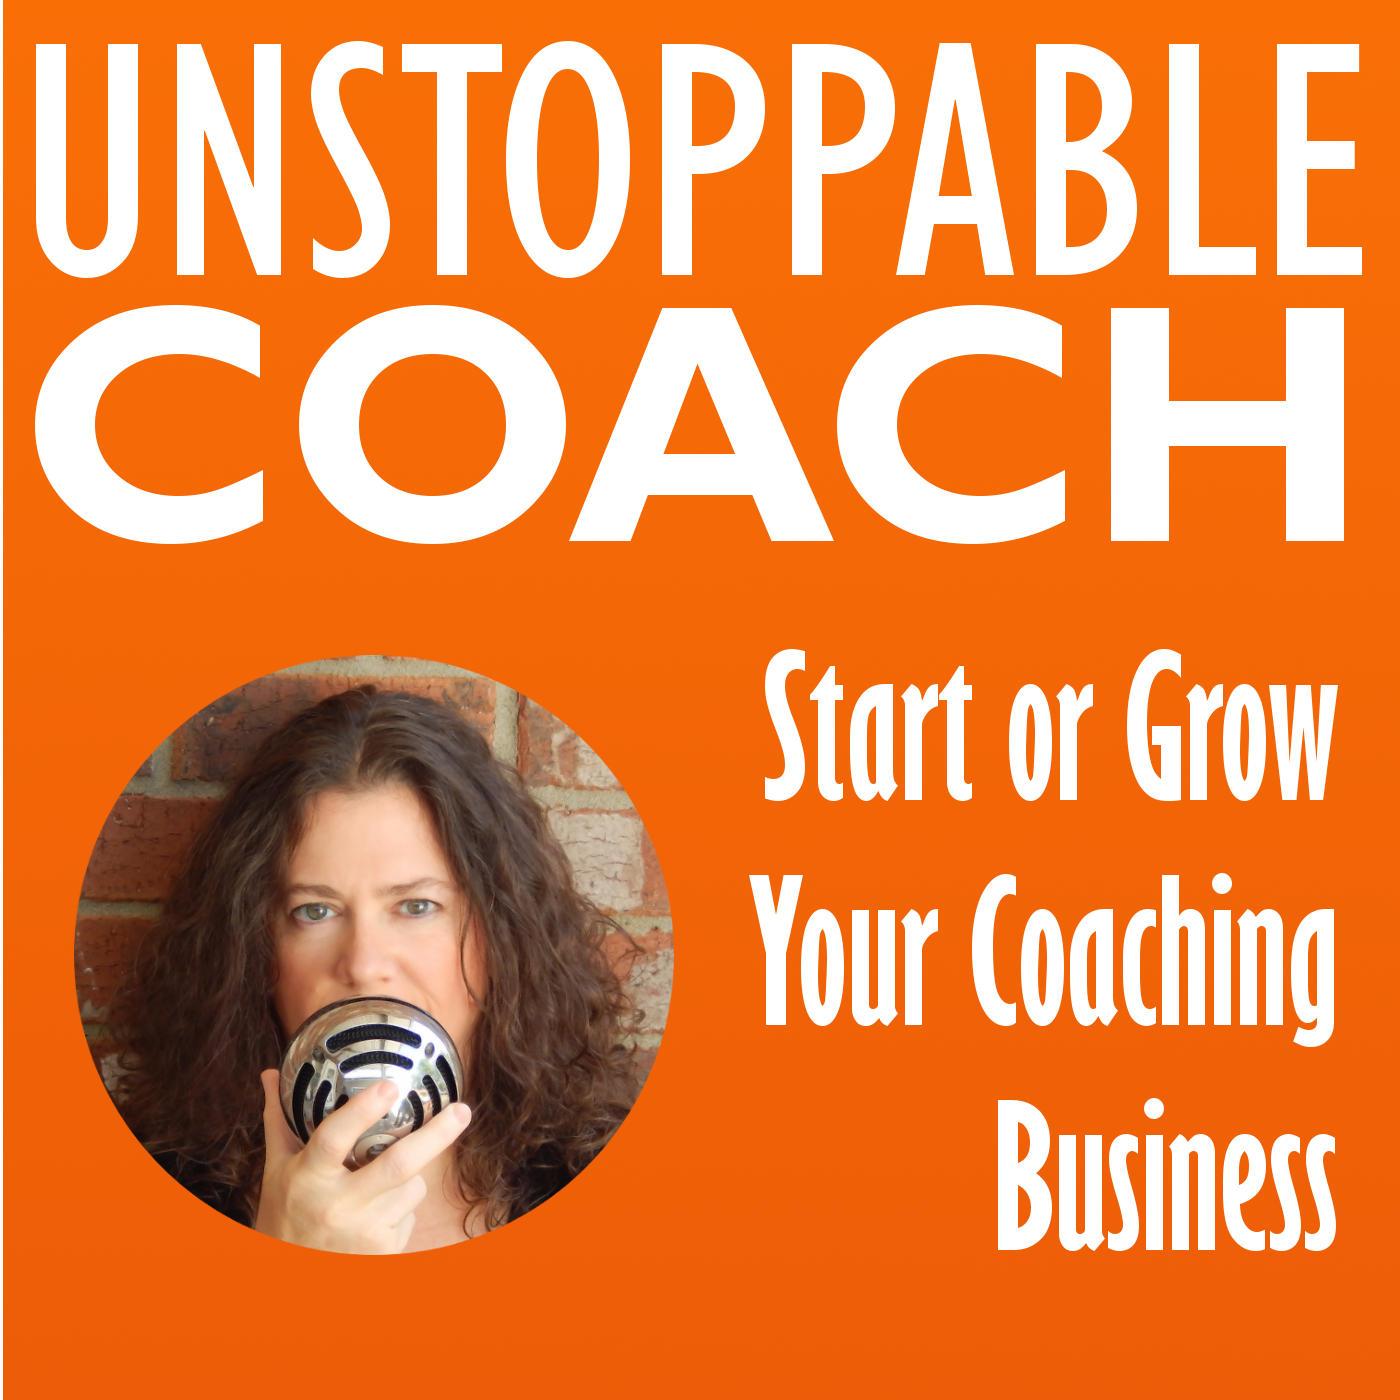 Unstoppable Coach | Inspiring weekly interviews to help you start or grow your coaching business with Millette Jones.